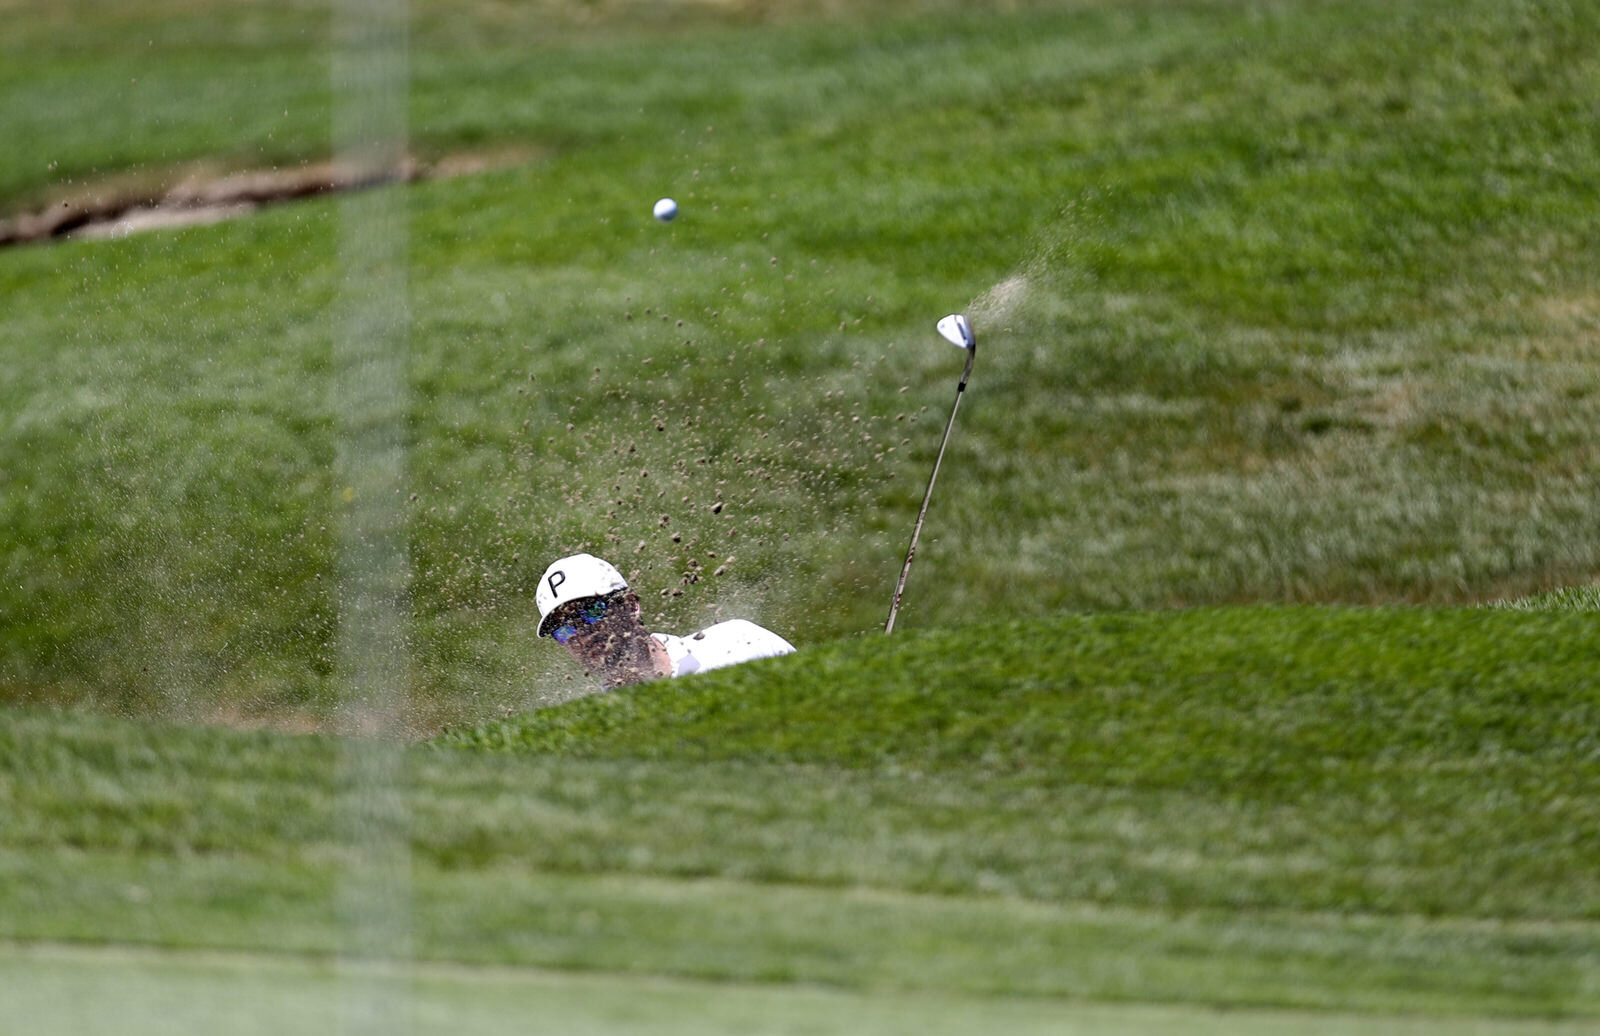  TRUCKEE, CALIFORNIA - AUGUST 01: Chris Baker plays a shot from a bunker on the second hole during the third round of the Barracuda Championship at Tahoe Mountain Club's Old Greenwood Golf Course on August 01, 2020 in Truckee, California. (Photo by J